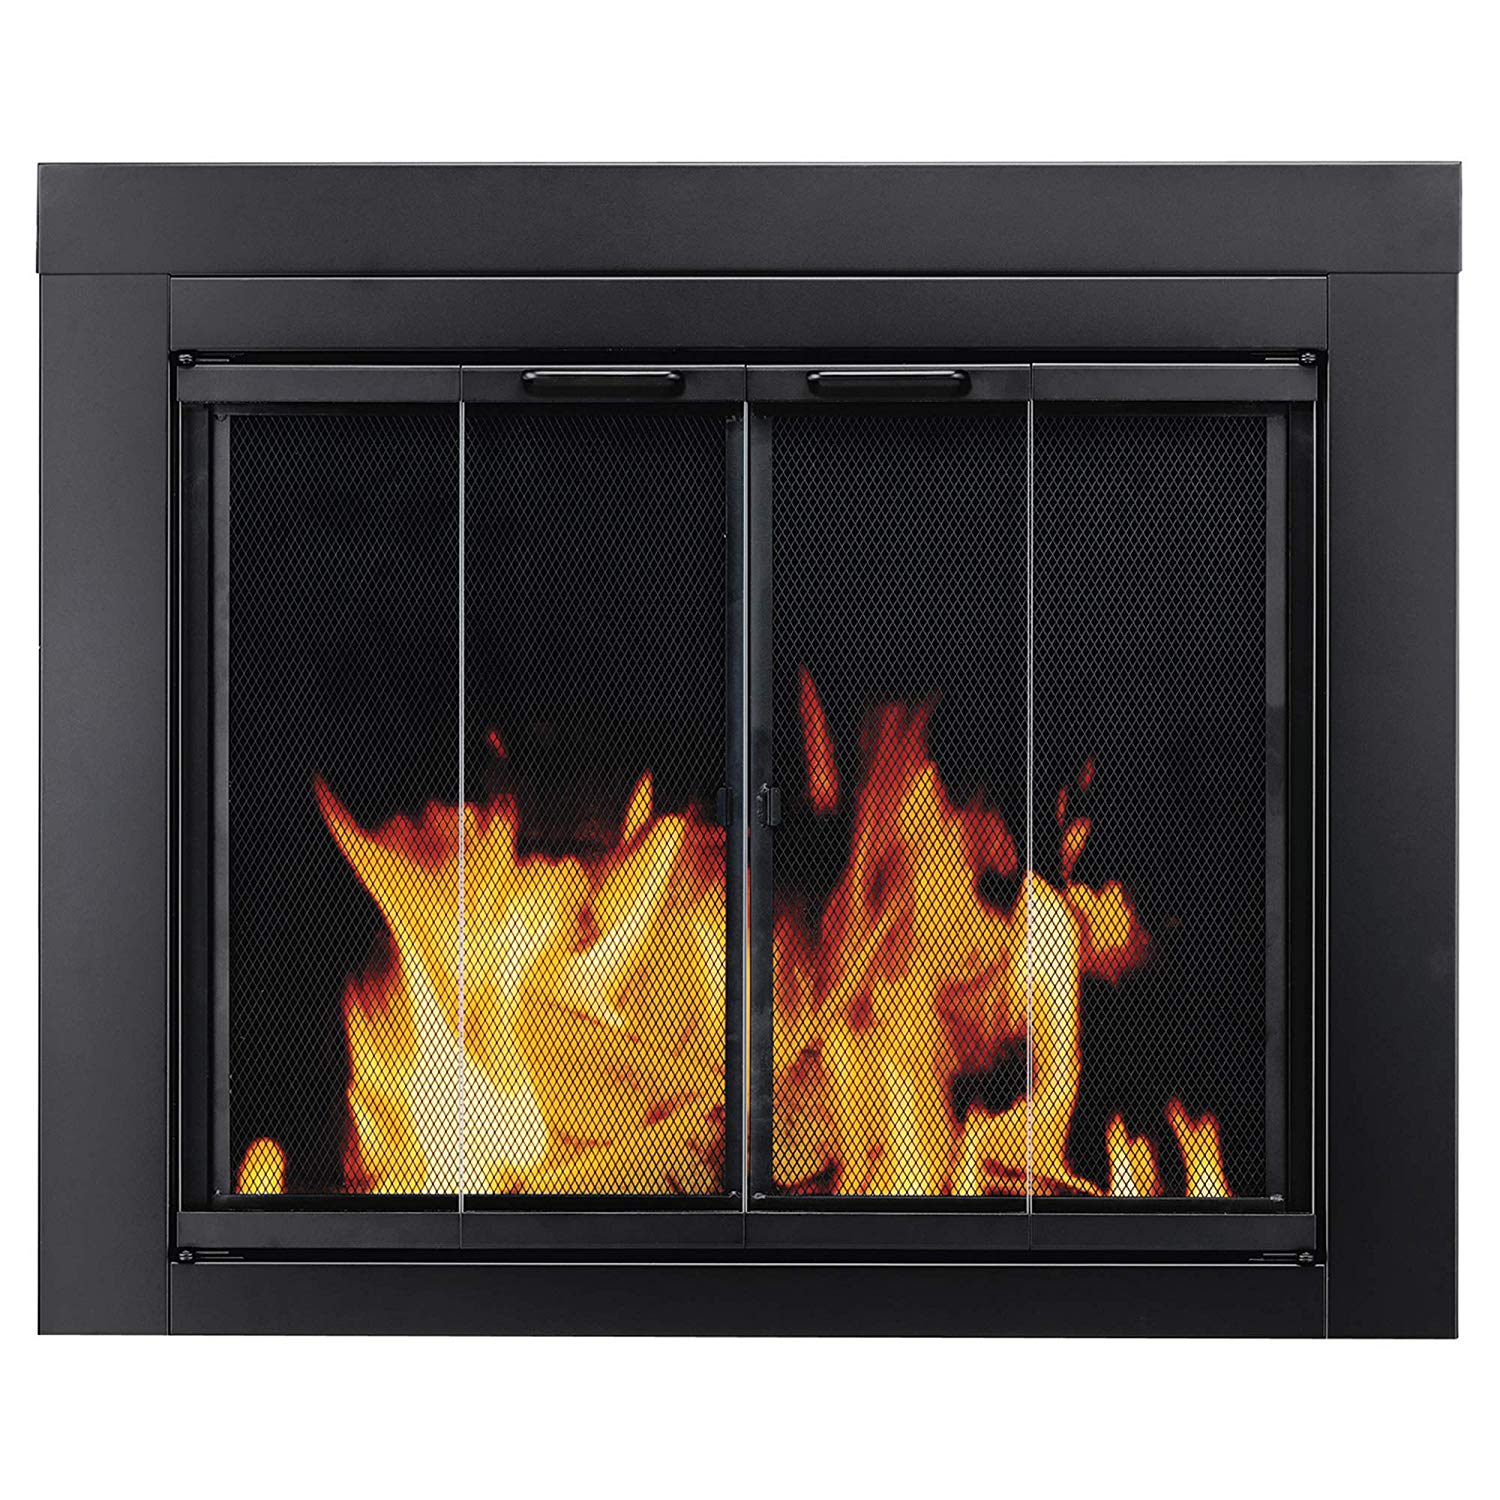 Fireplace Hearth Stone Lovely Pleasant Hearth at 1000 ascot Fireplace Glass Door Black Small